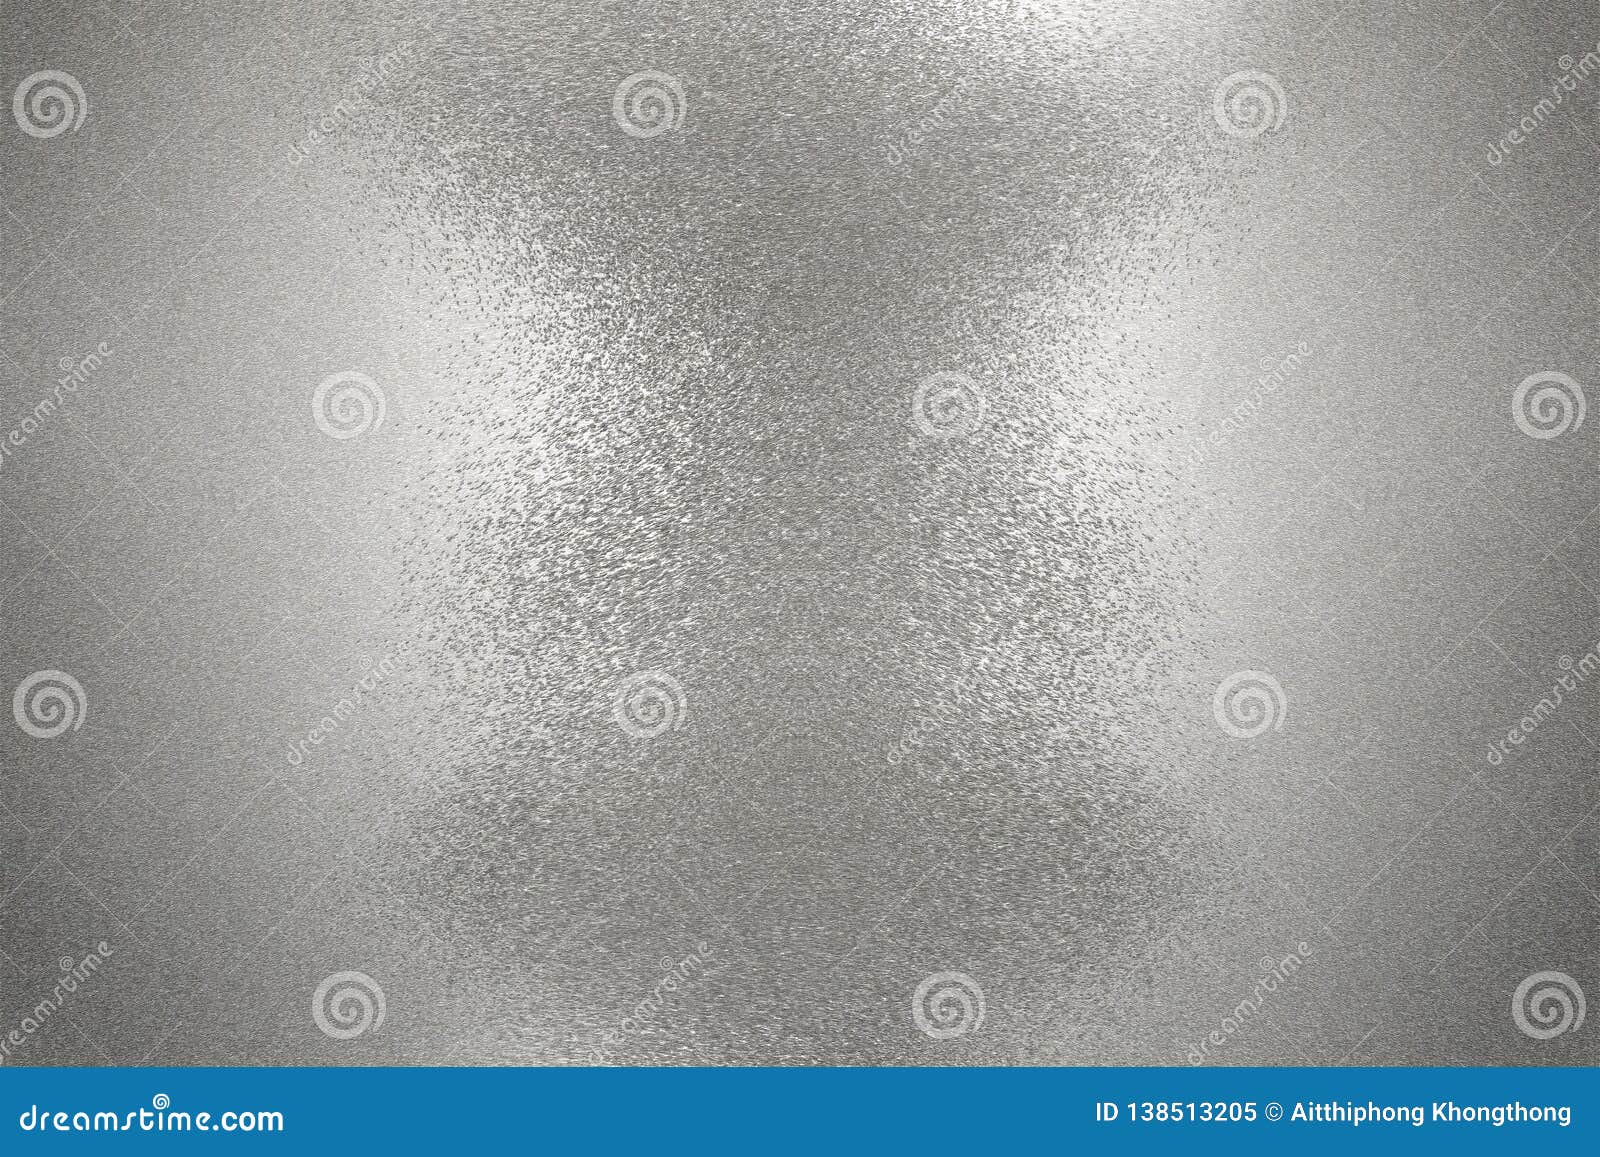 Reflection on Rough Silver Wall Surfaces, Abstract Background Stock ...